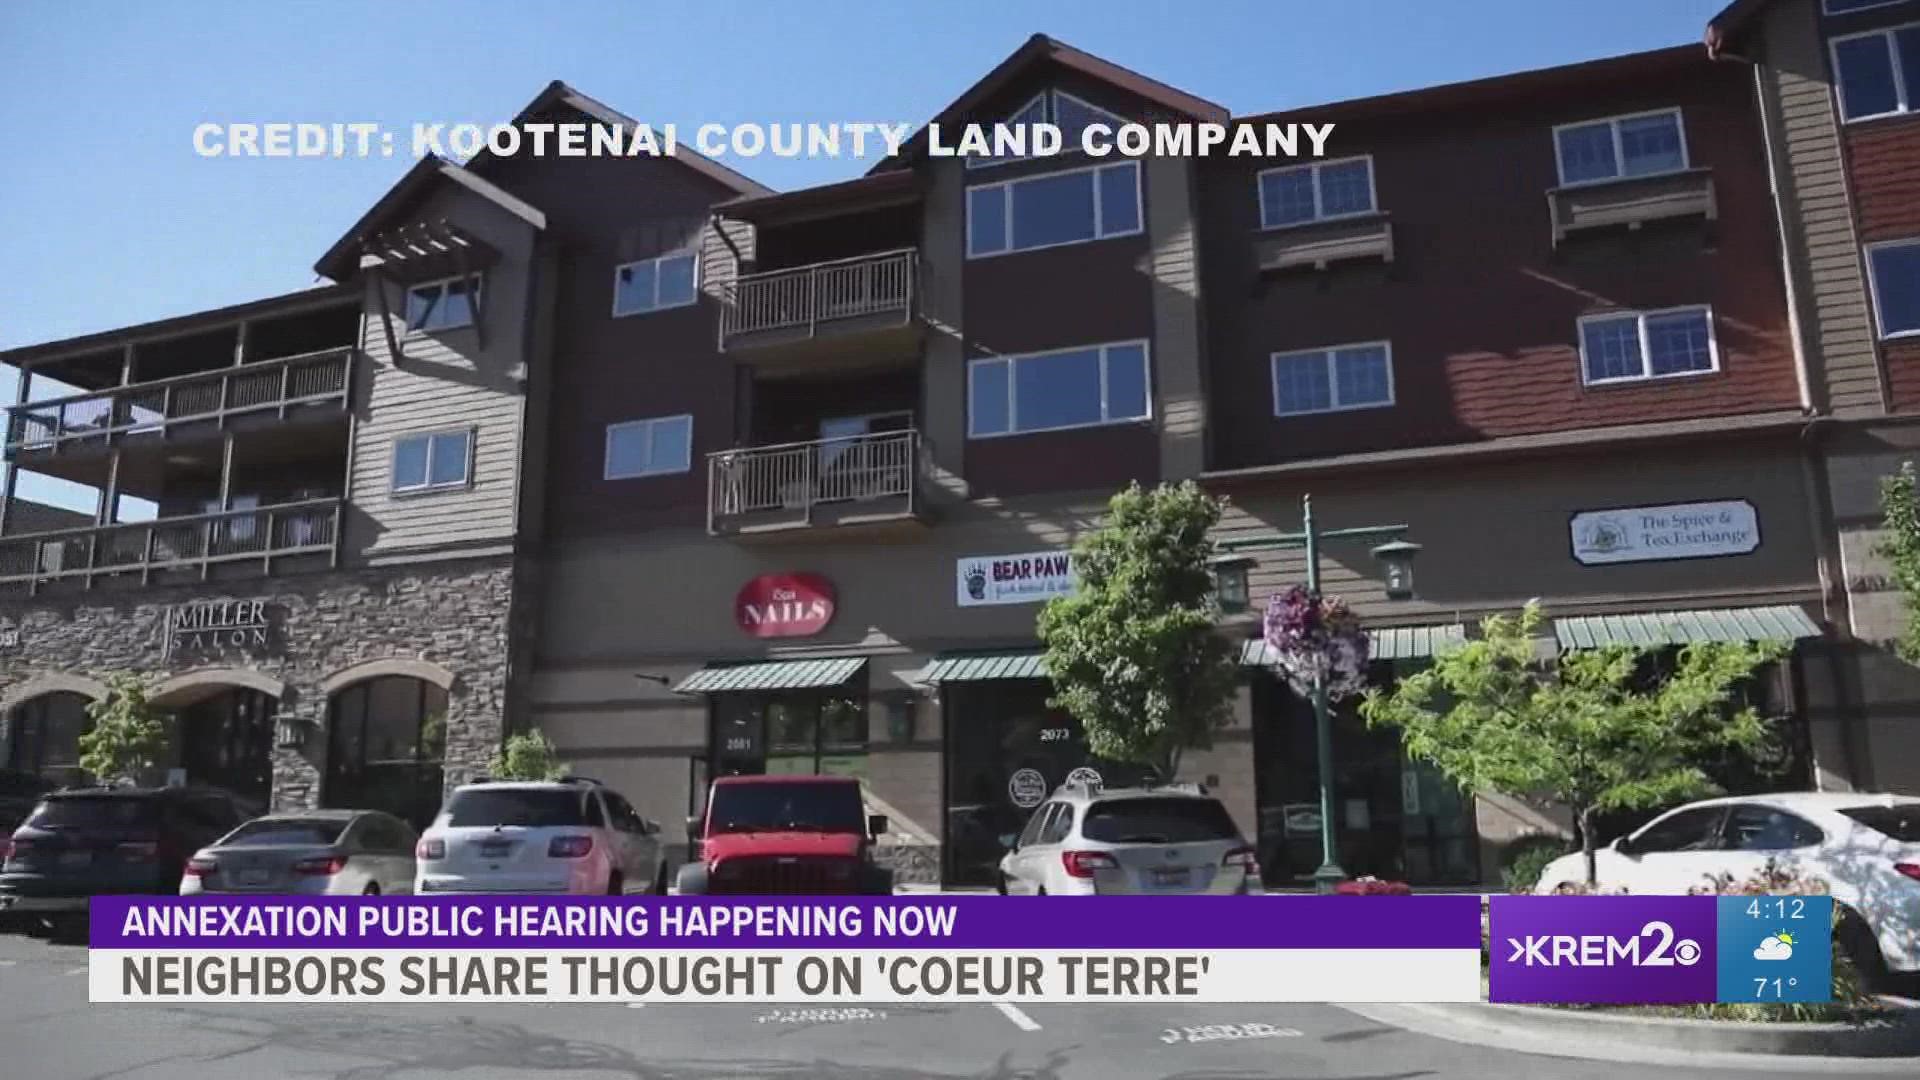 Some of the proposed 'Coeur Terre' project plans  includes 4,500 homes over 20 to 25 years, along Huetter Road in North Idaho and a mixed-use commercial area.